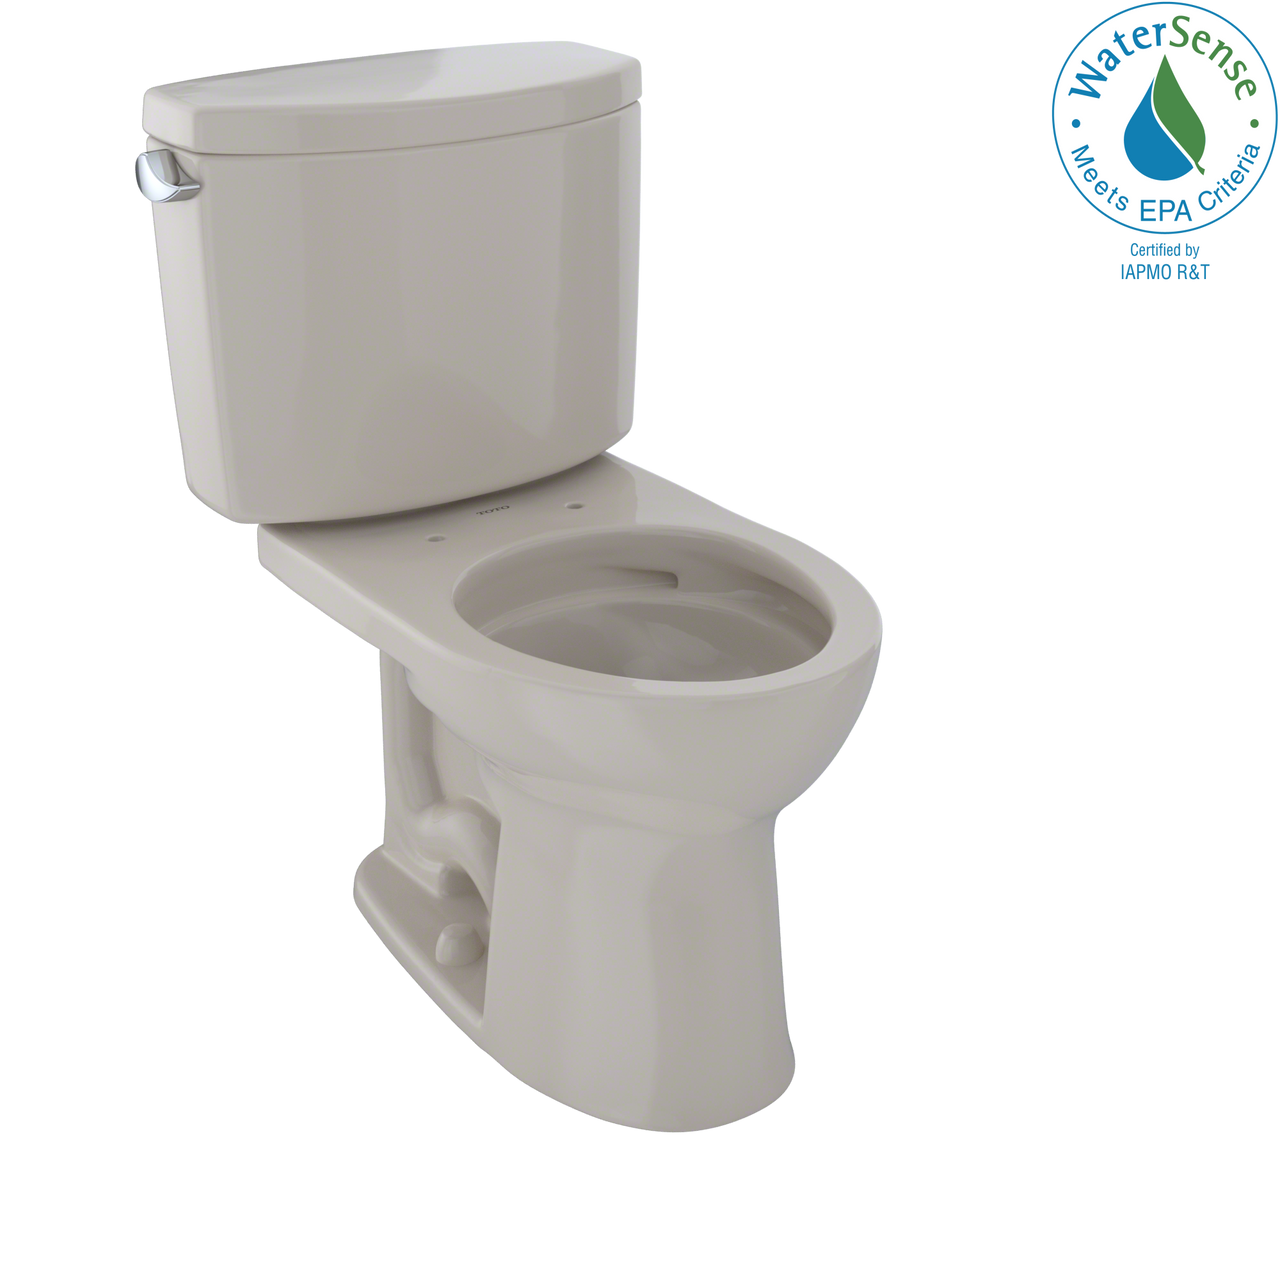 TOTO Drake II Two-Piece Round 1.28 GPF Universal Height Toilet with CeFiONtect,  - CST453CEFG#03 - BNGBath